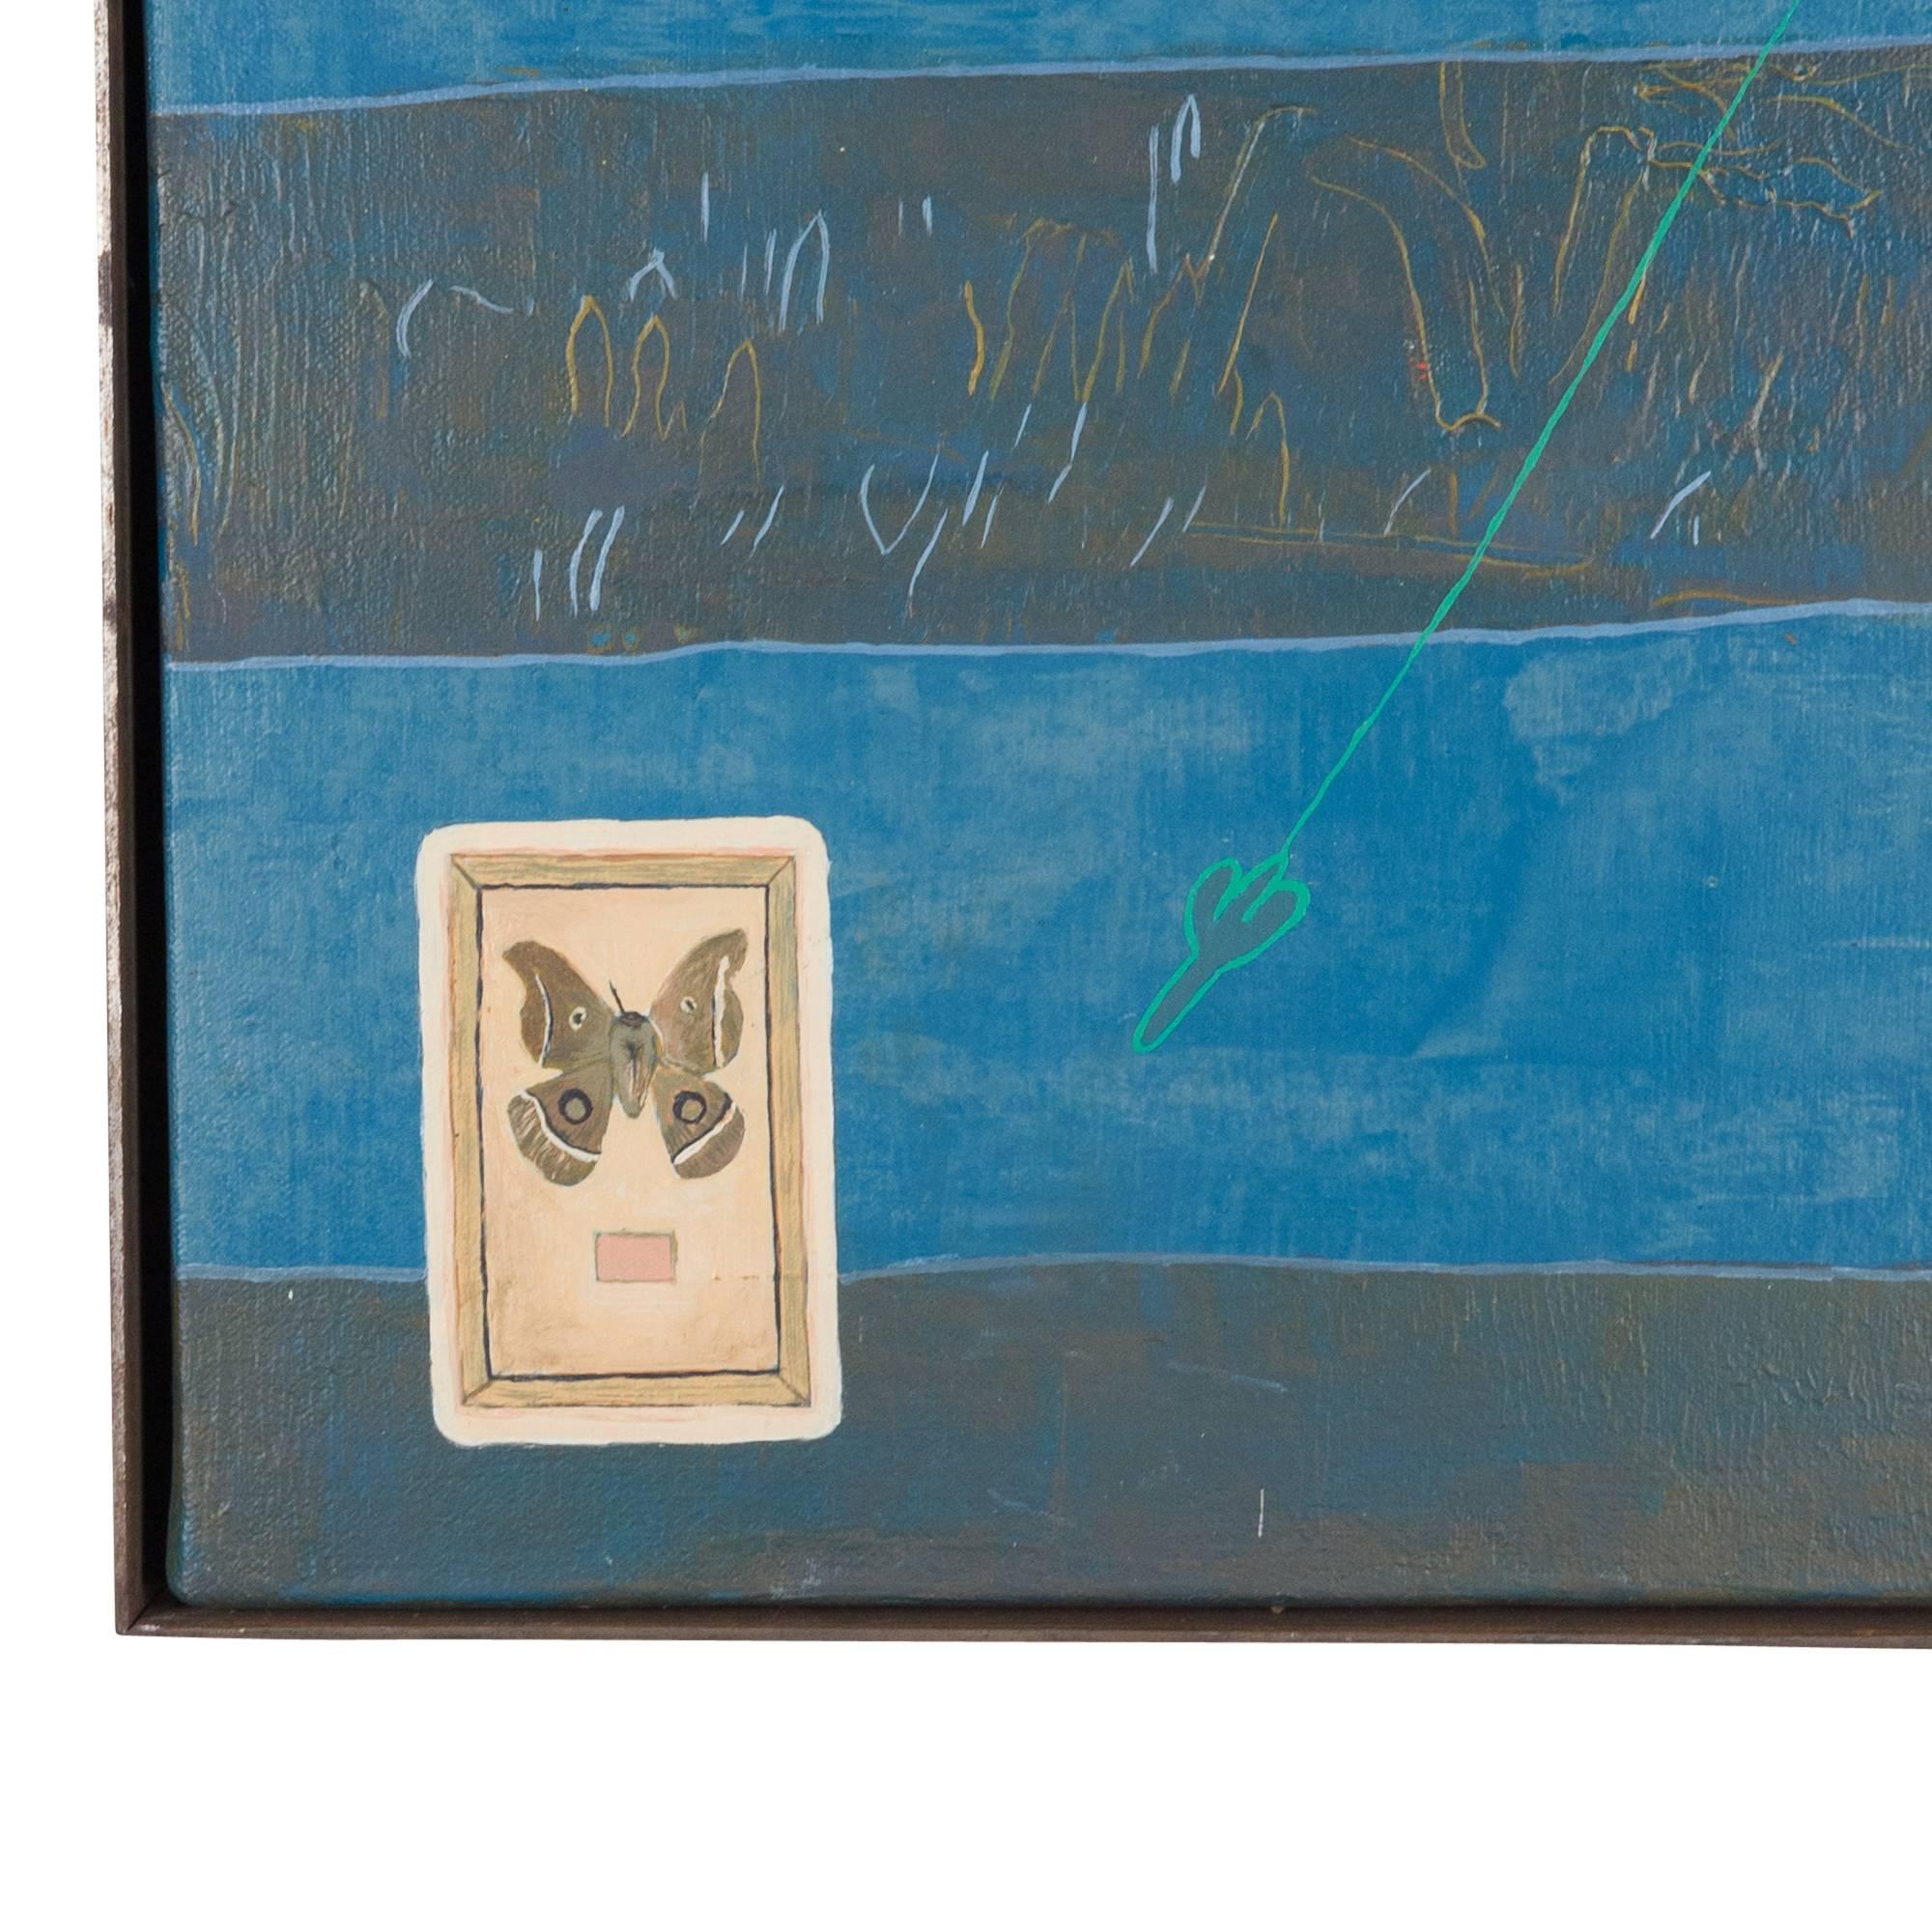 Oil on board, abstract with butterfly stamp by Rachel Harris, United States, late 20th century. In custom steel frame. Measures: Framed 12 1/4 in square, depth 1 1/2 in.